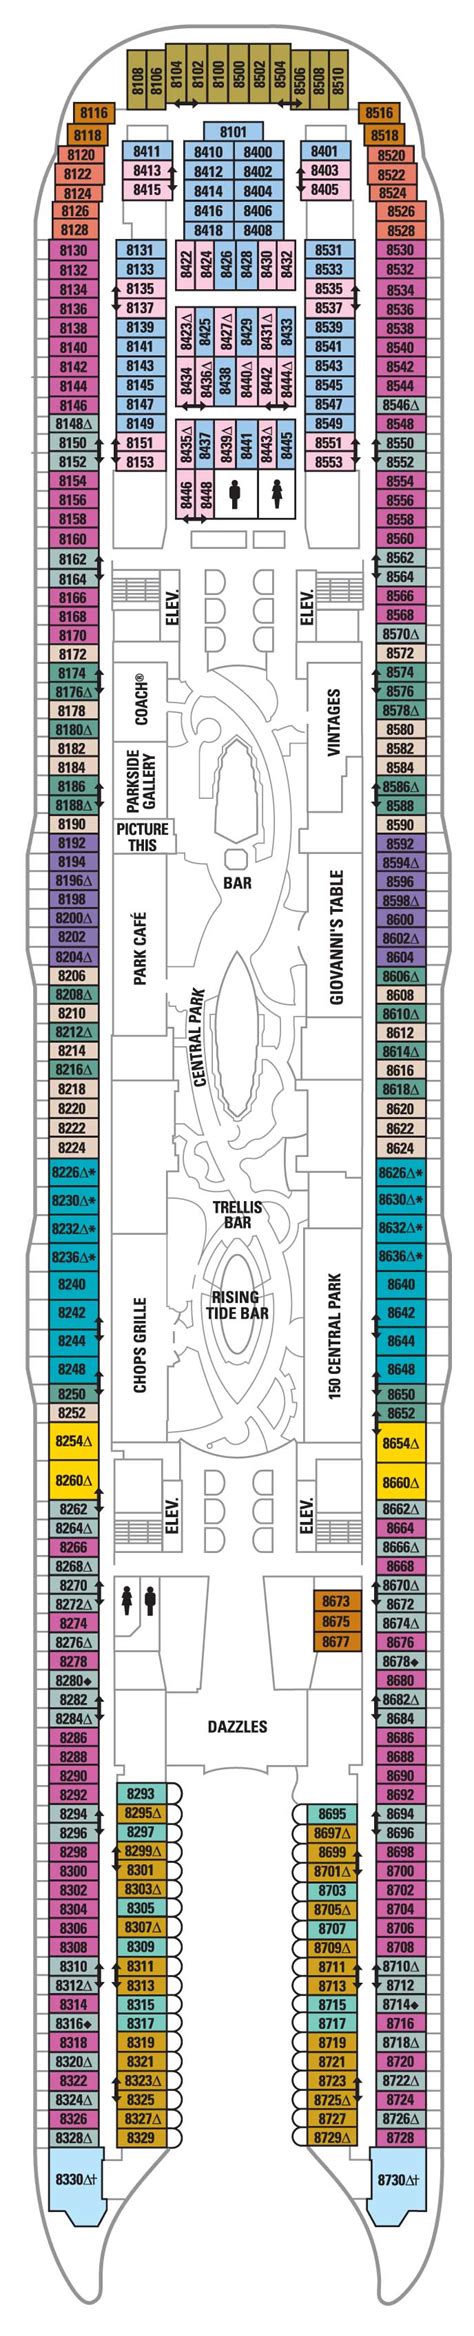 Deck Plan For Allure Of The Seas F